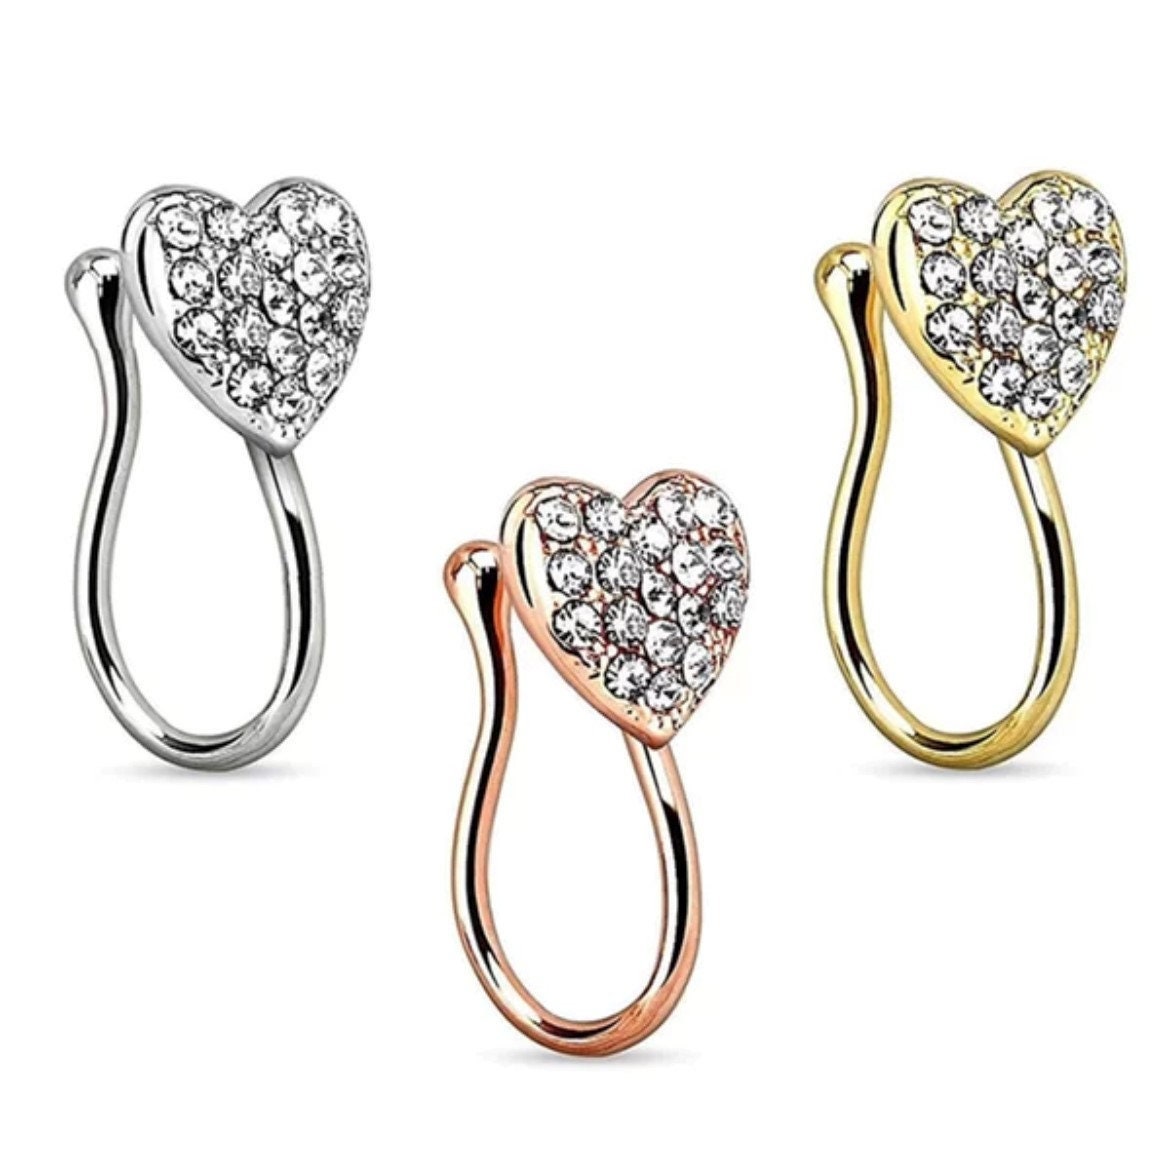 Heart with Gems Clip On Nose Ring Fake Non No Piercing 17GA 